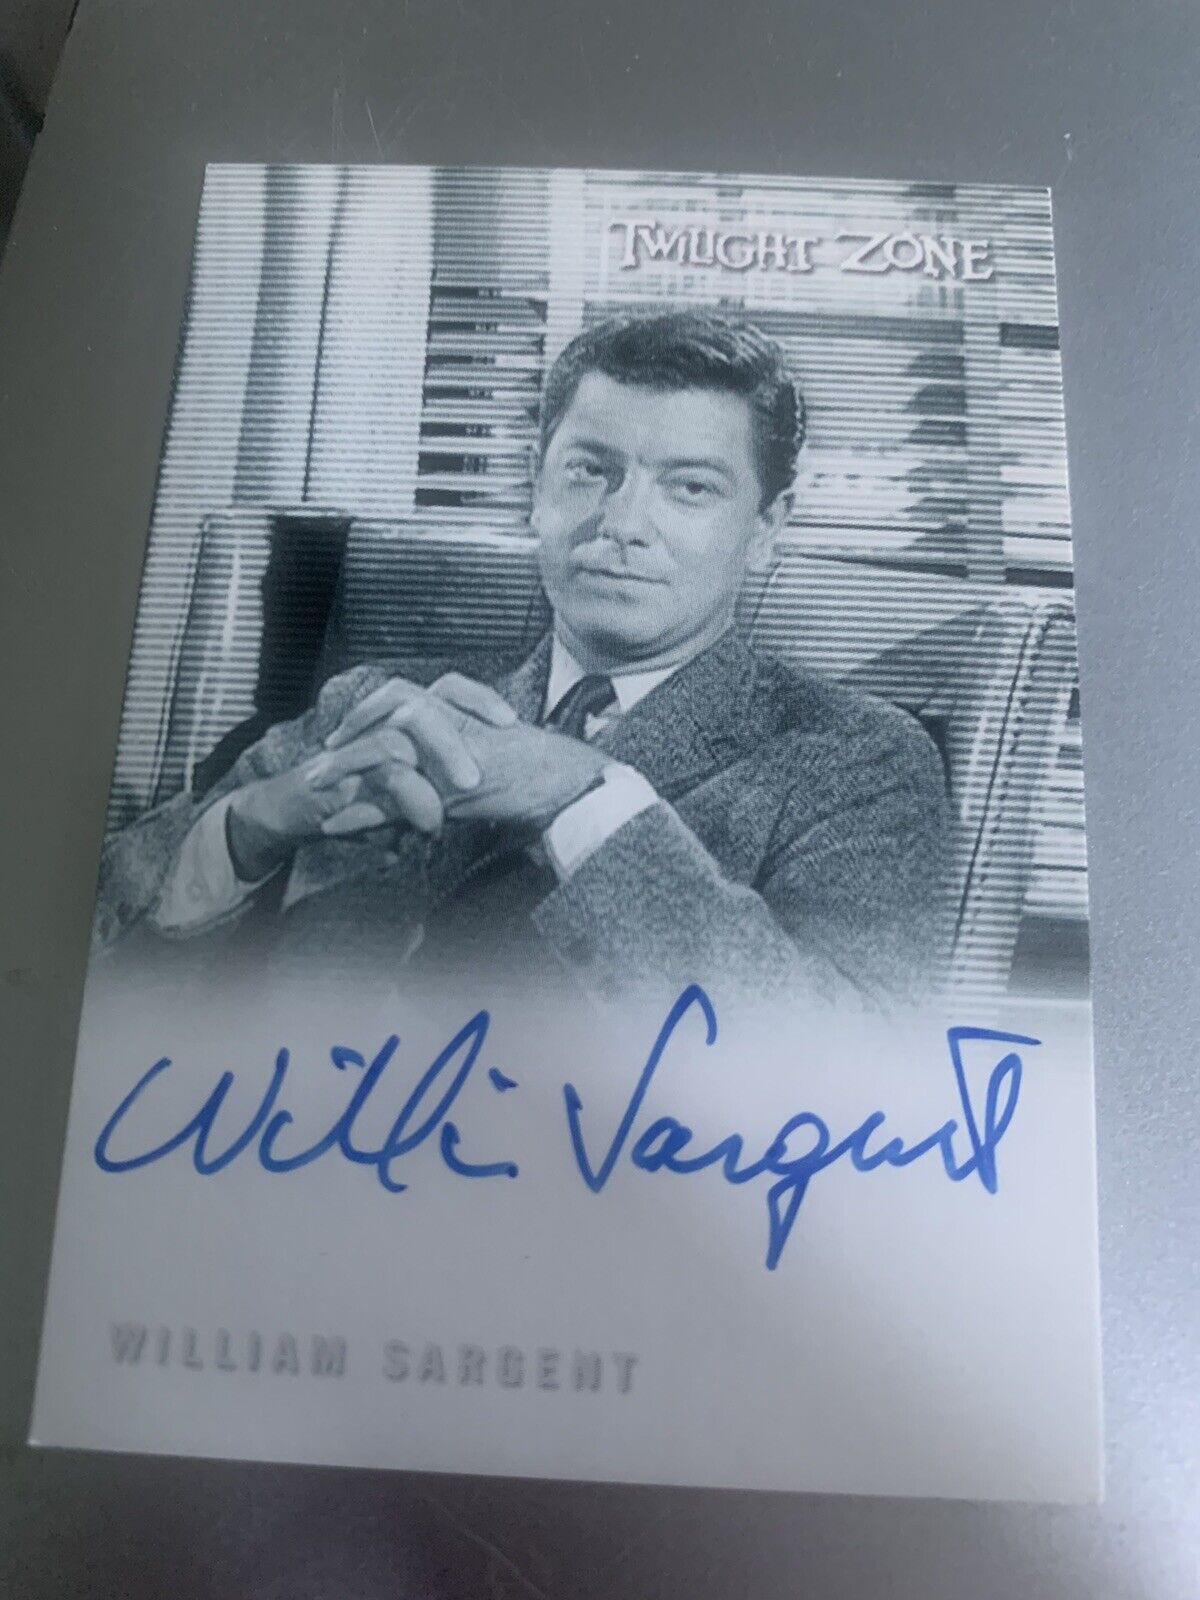 The Complete Twilight Zone 50th Anniversary William Sargent A104 autograph card